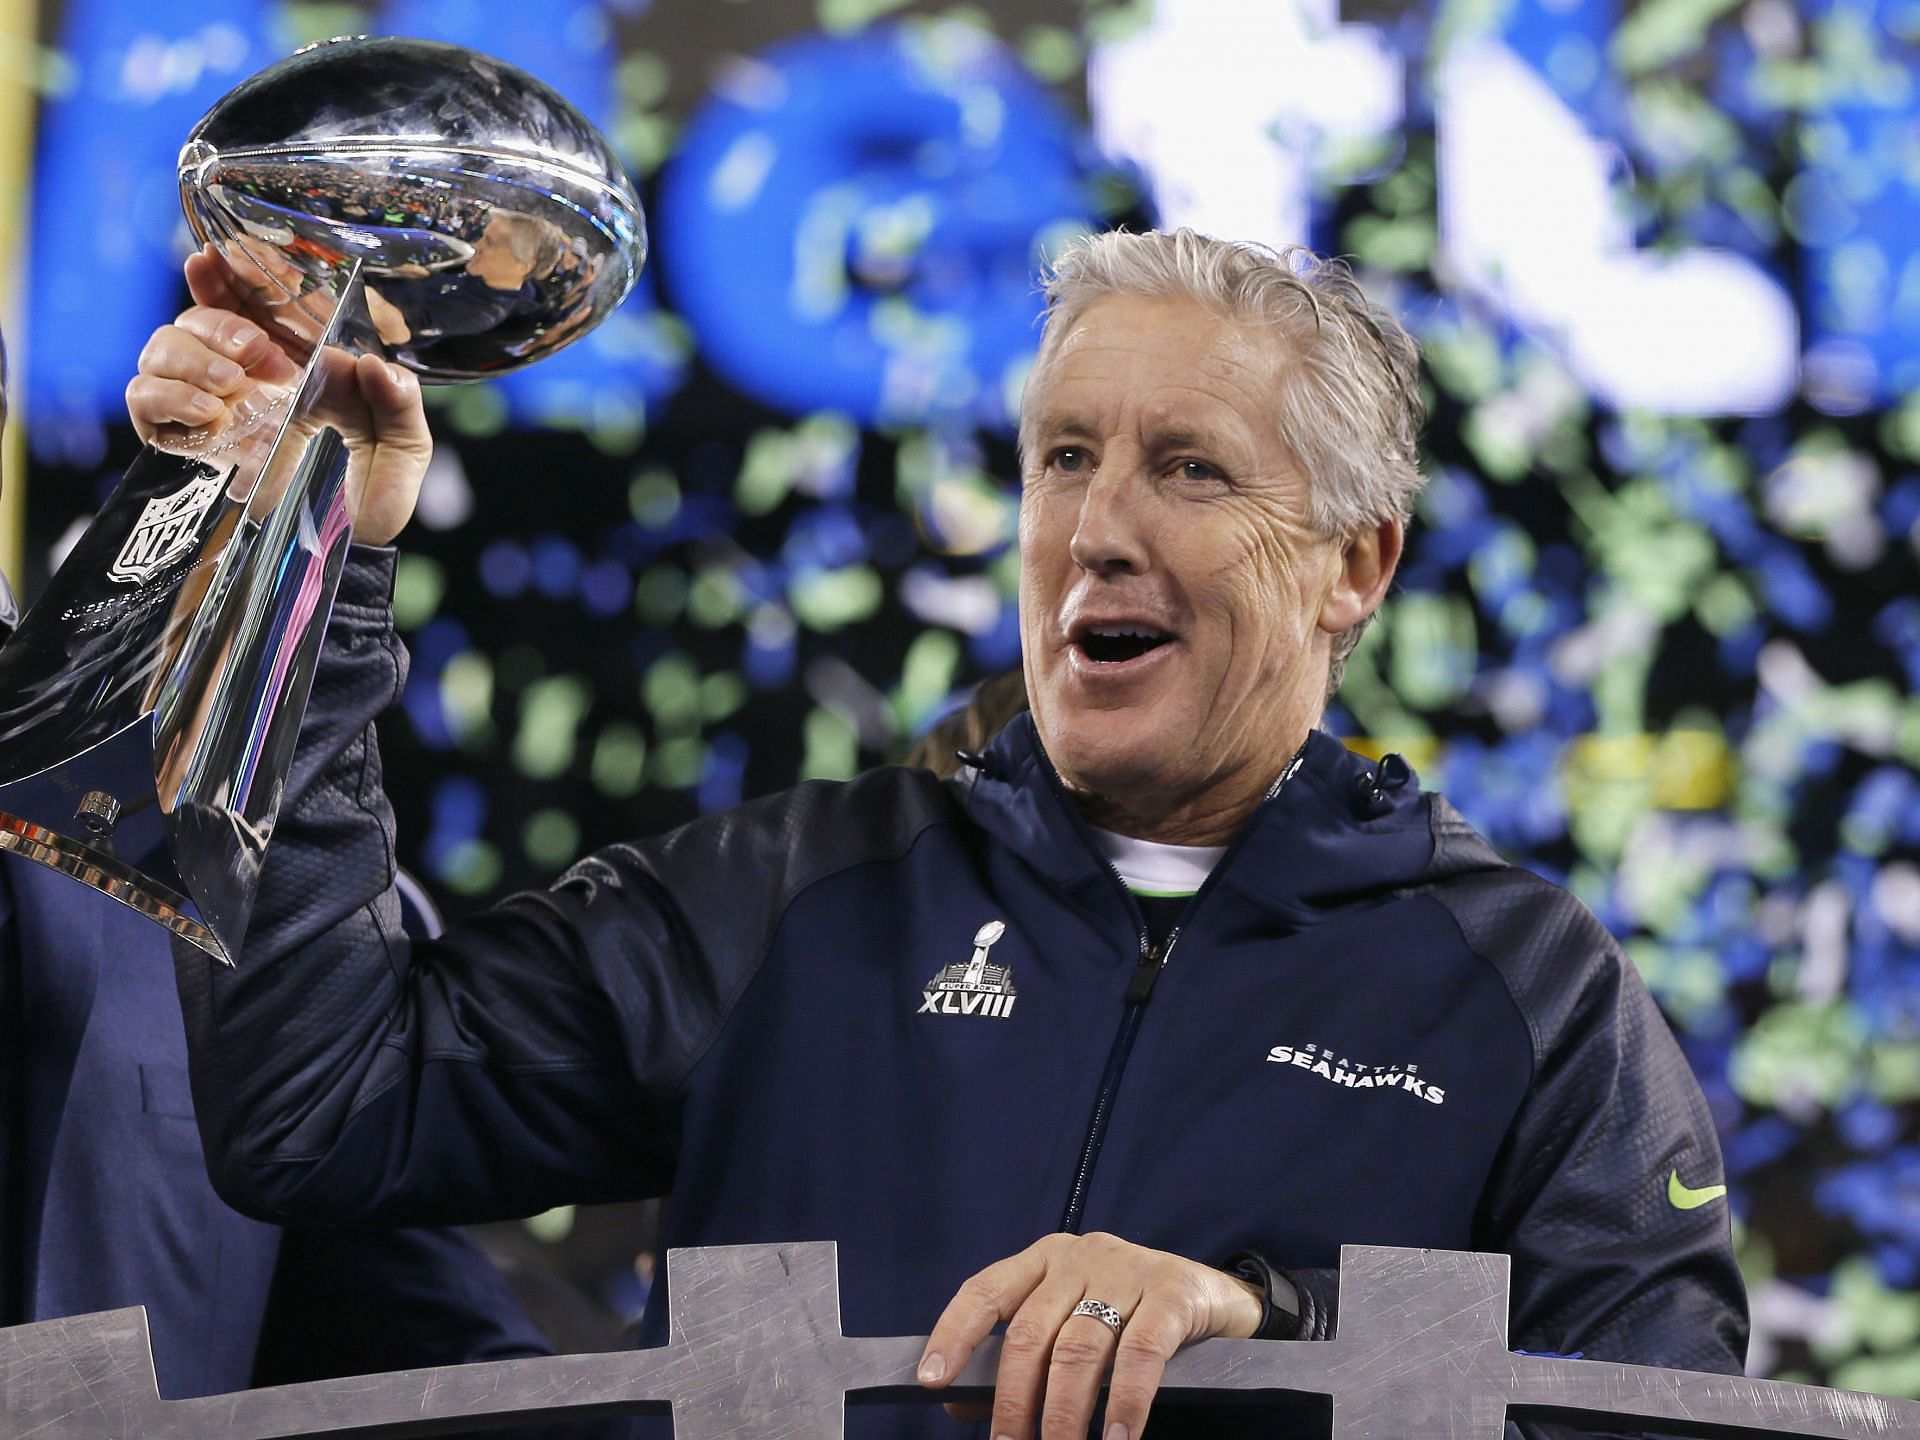 Pete Carroll lifting the Vince Lombardi trophy after winning Super Bowl XLVIII with Seattle Seahawks